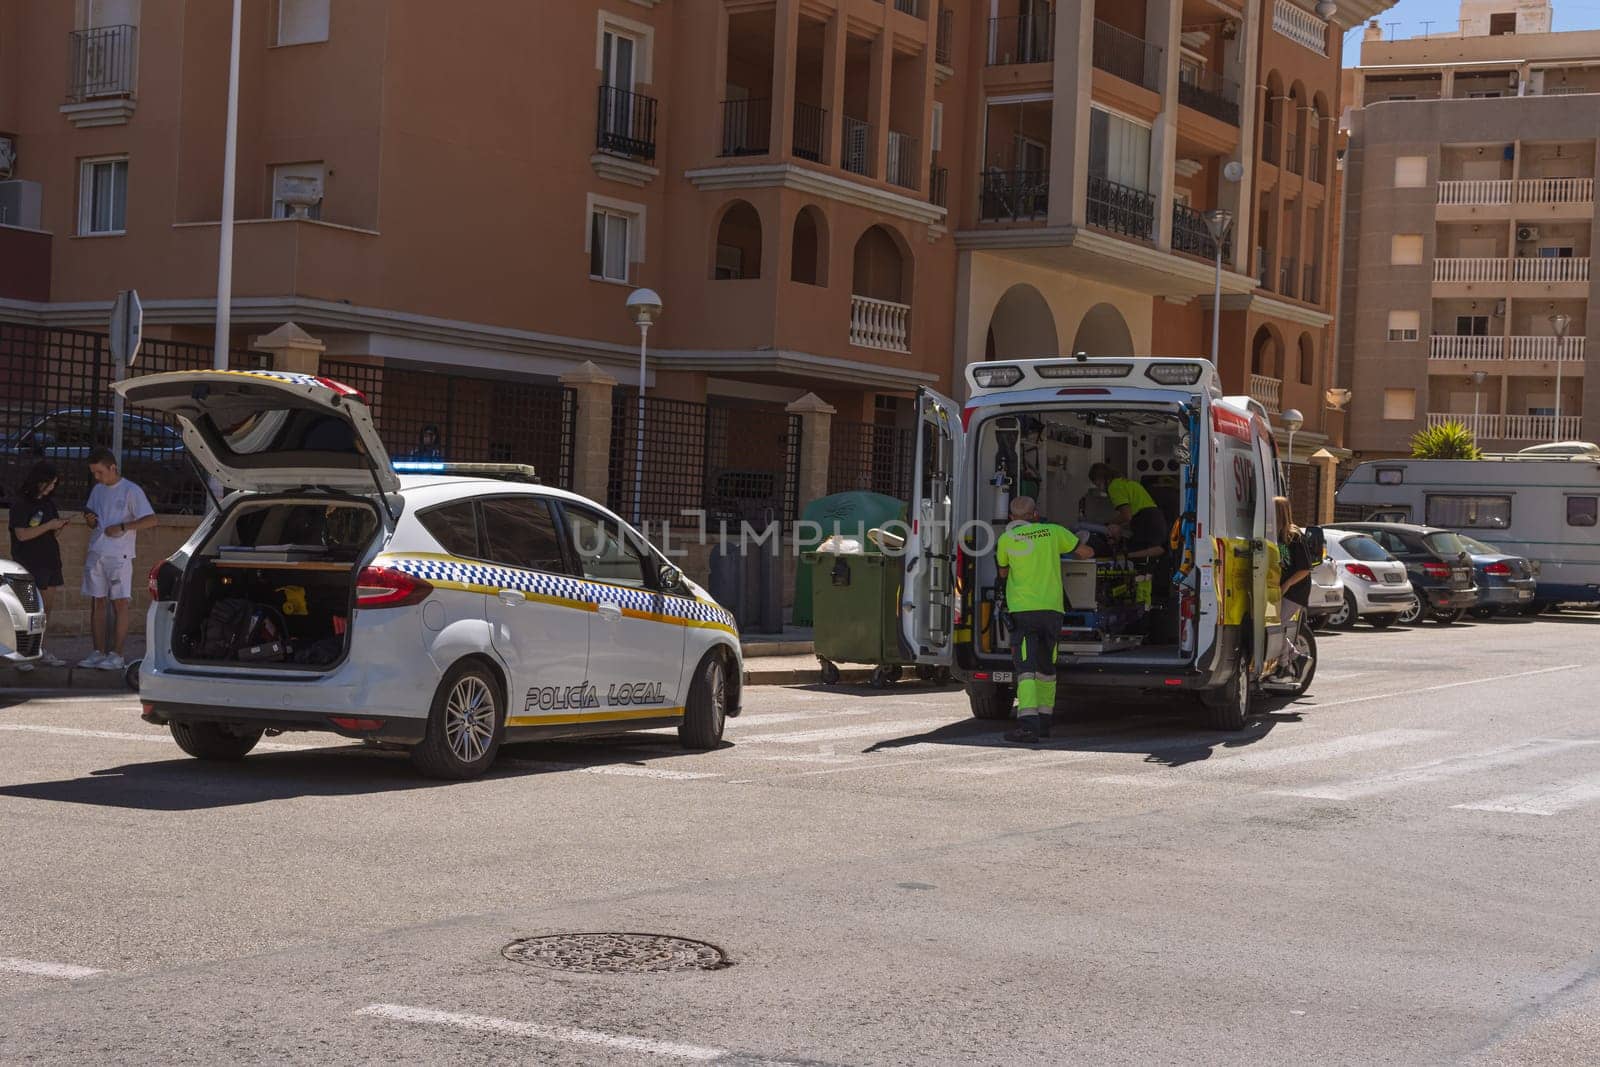 Spain, Torrevieja May 28, 2023, an ambulance on the road picks up a man who was hit by a car on the road, a resort town in Spain near the sea by PopOff